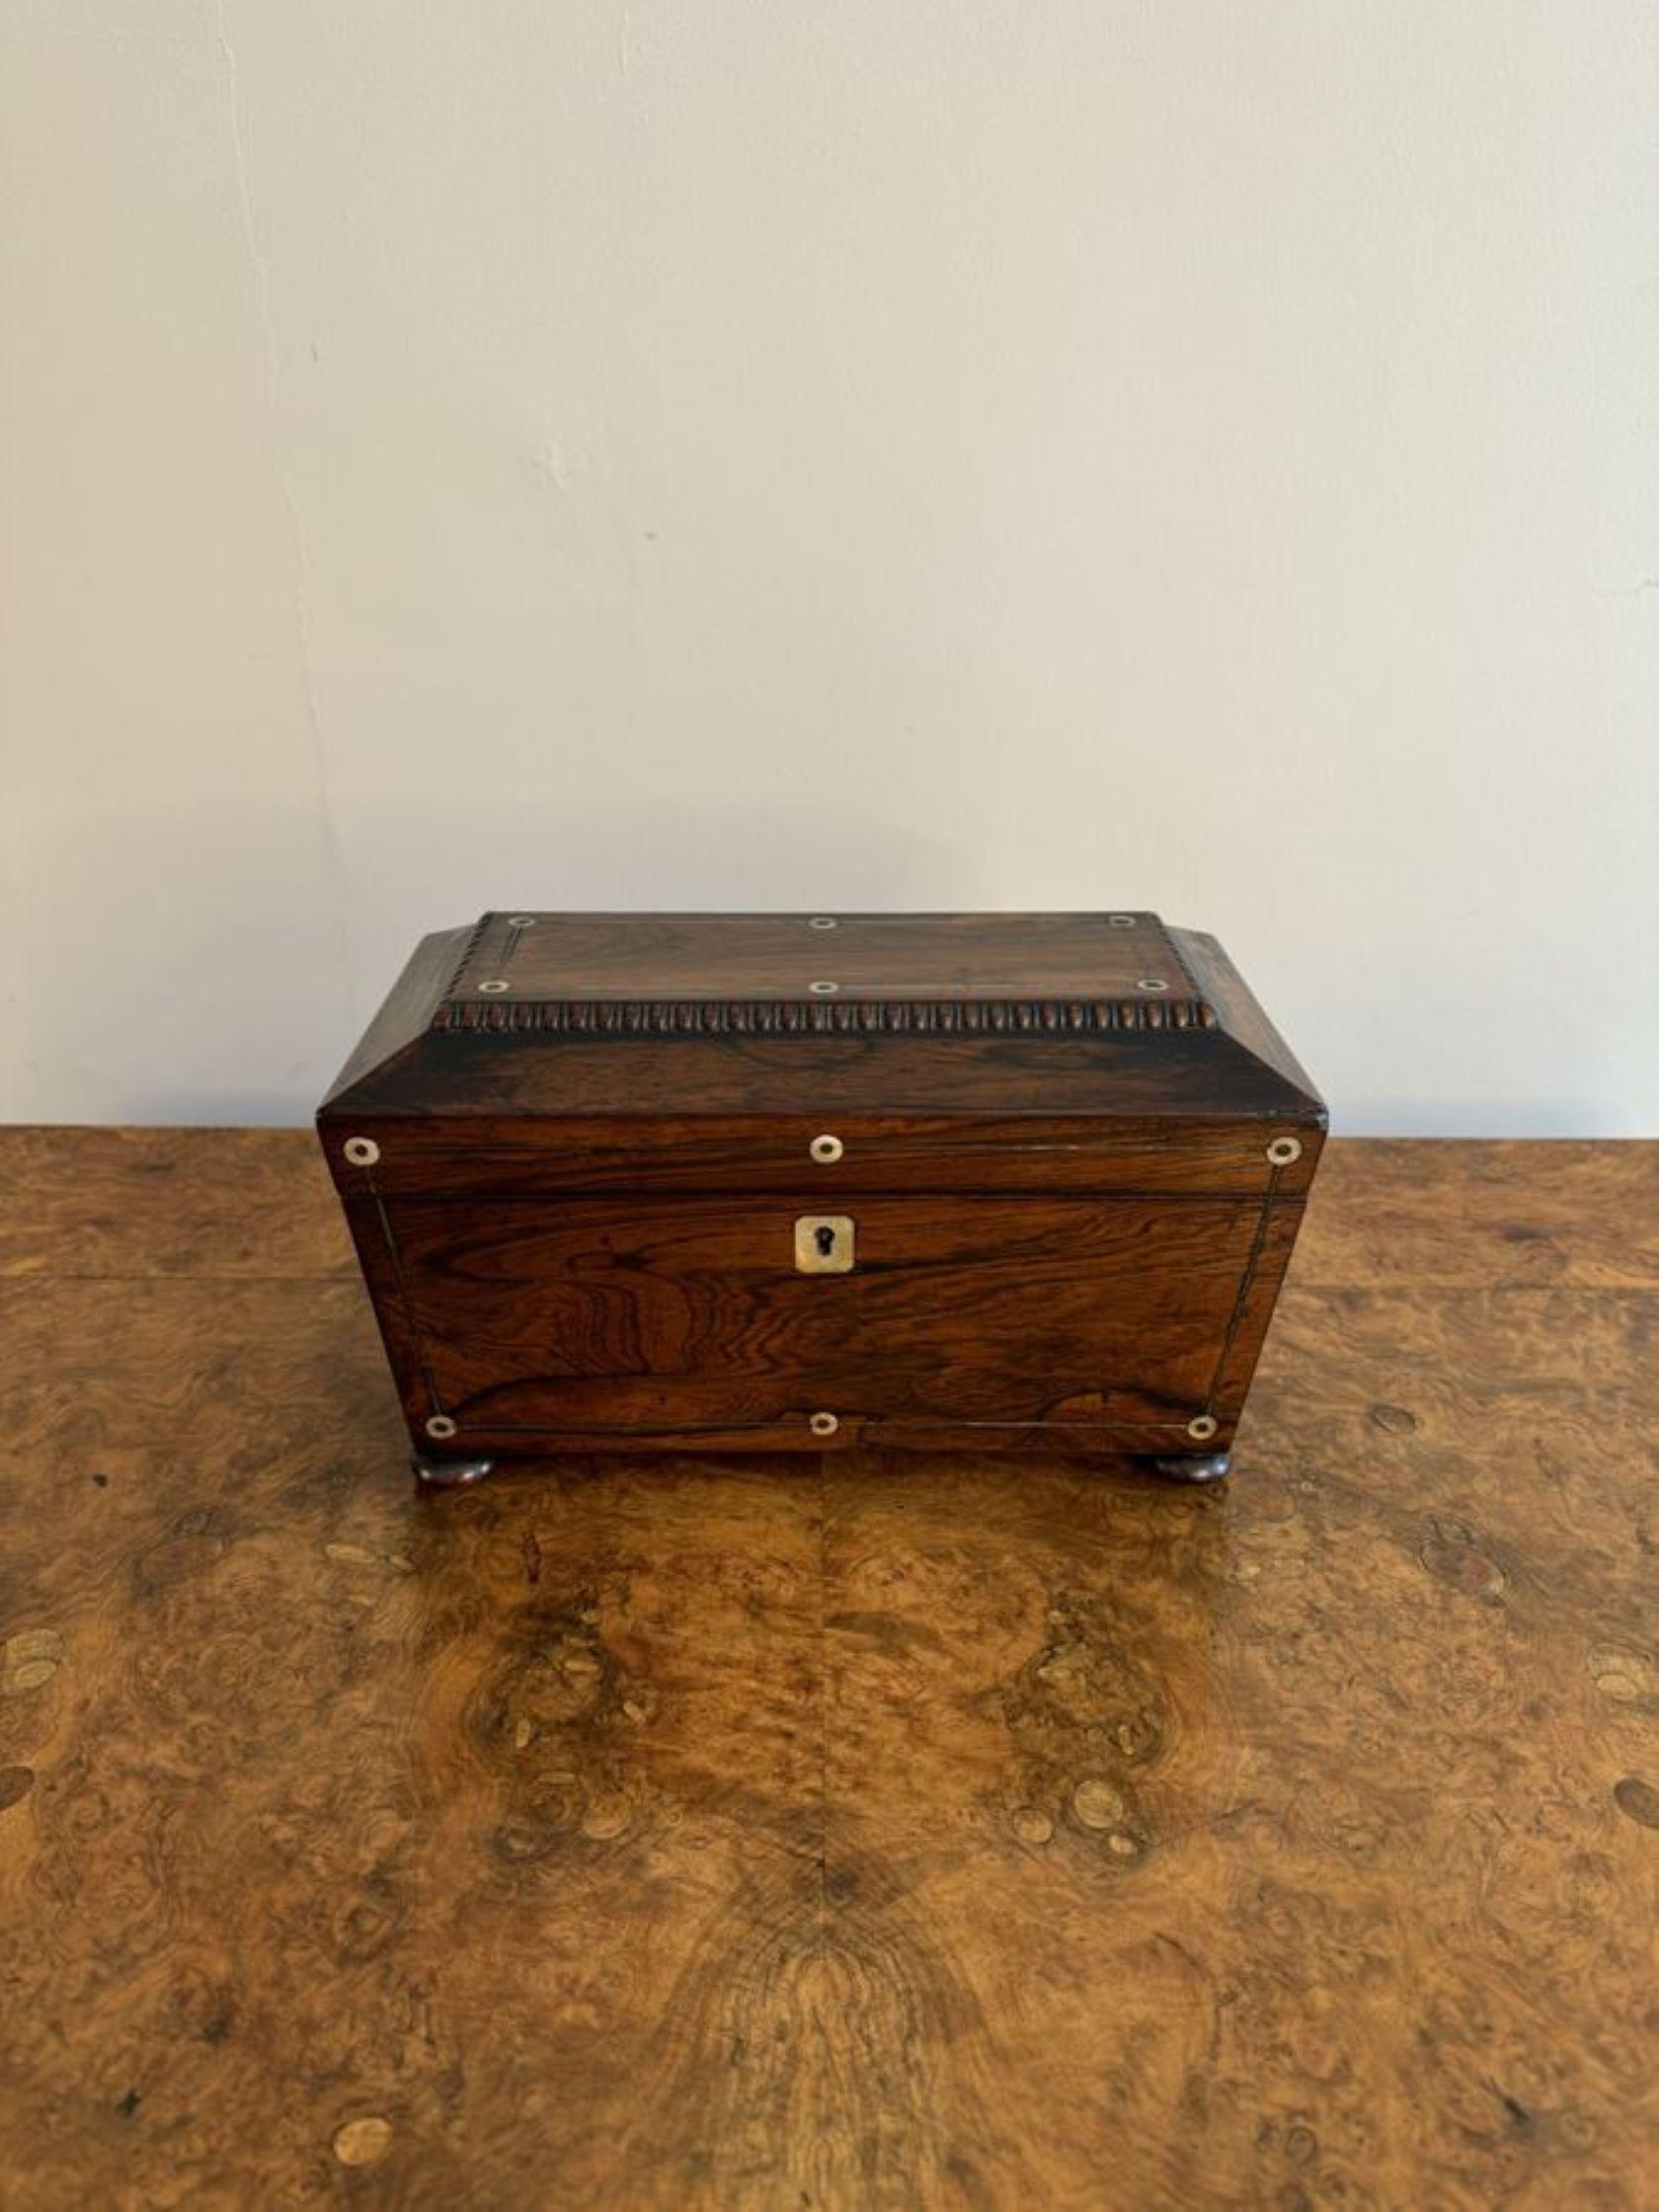 Quality antique Regency rosewood tea caddy having a quality antique Regency rosewood tea caddy with a quality carved moulded edge top opening to reveal a fitted interior with two lidded compartments for tea and a glass mixing bowl to the centre,